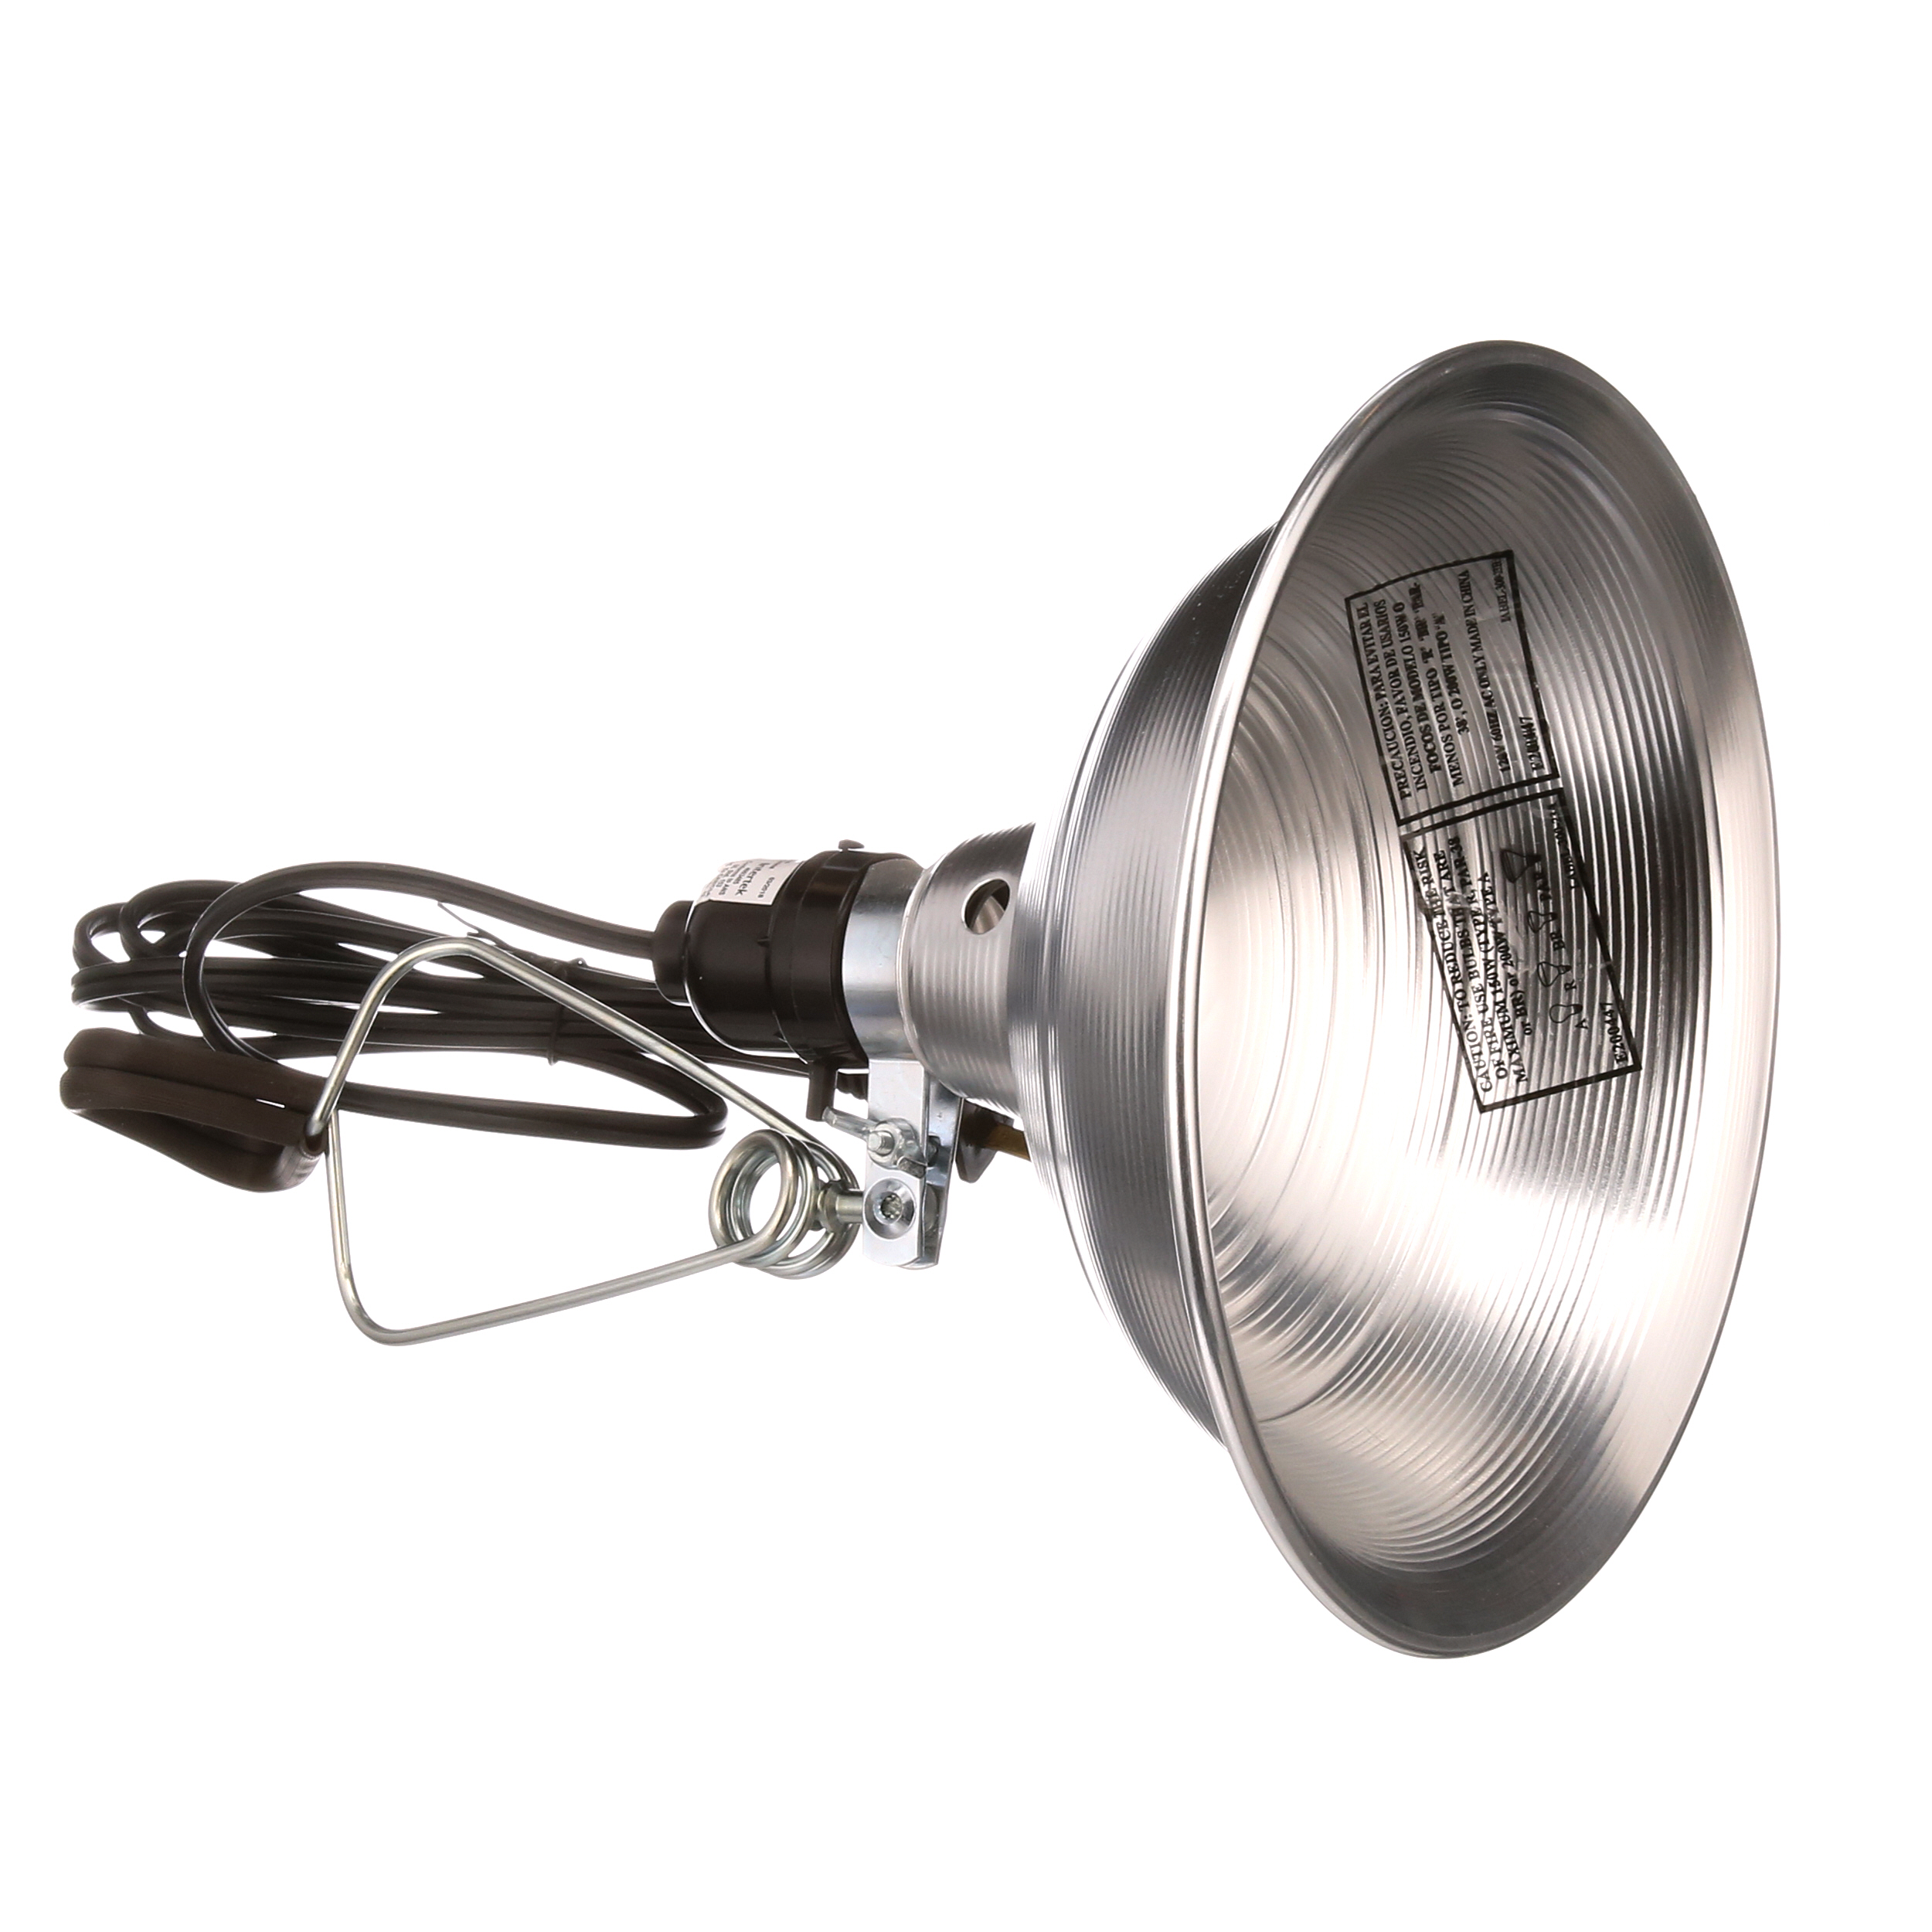 Bayco SL-300 8.5-inch Clamp Light with Aluminum Reflector - image 4 of 11